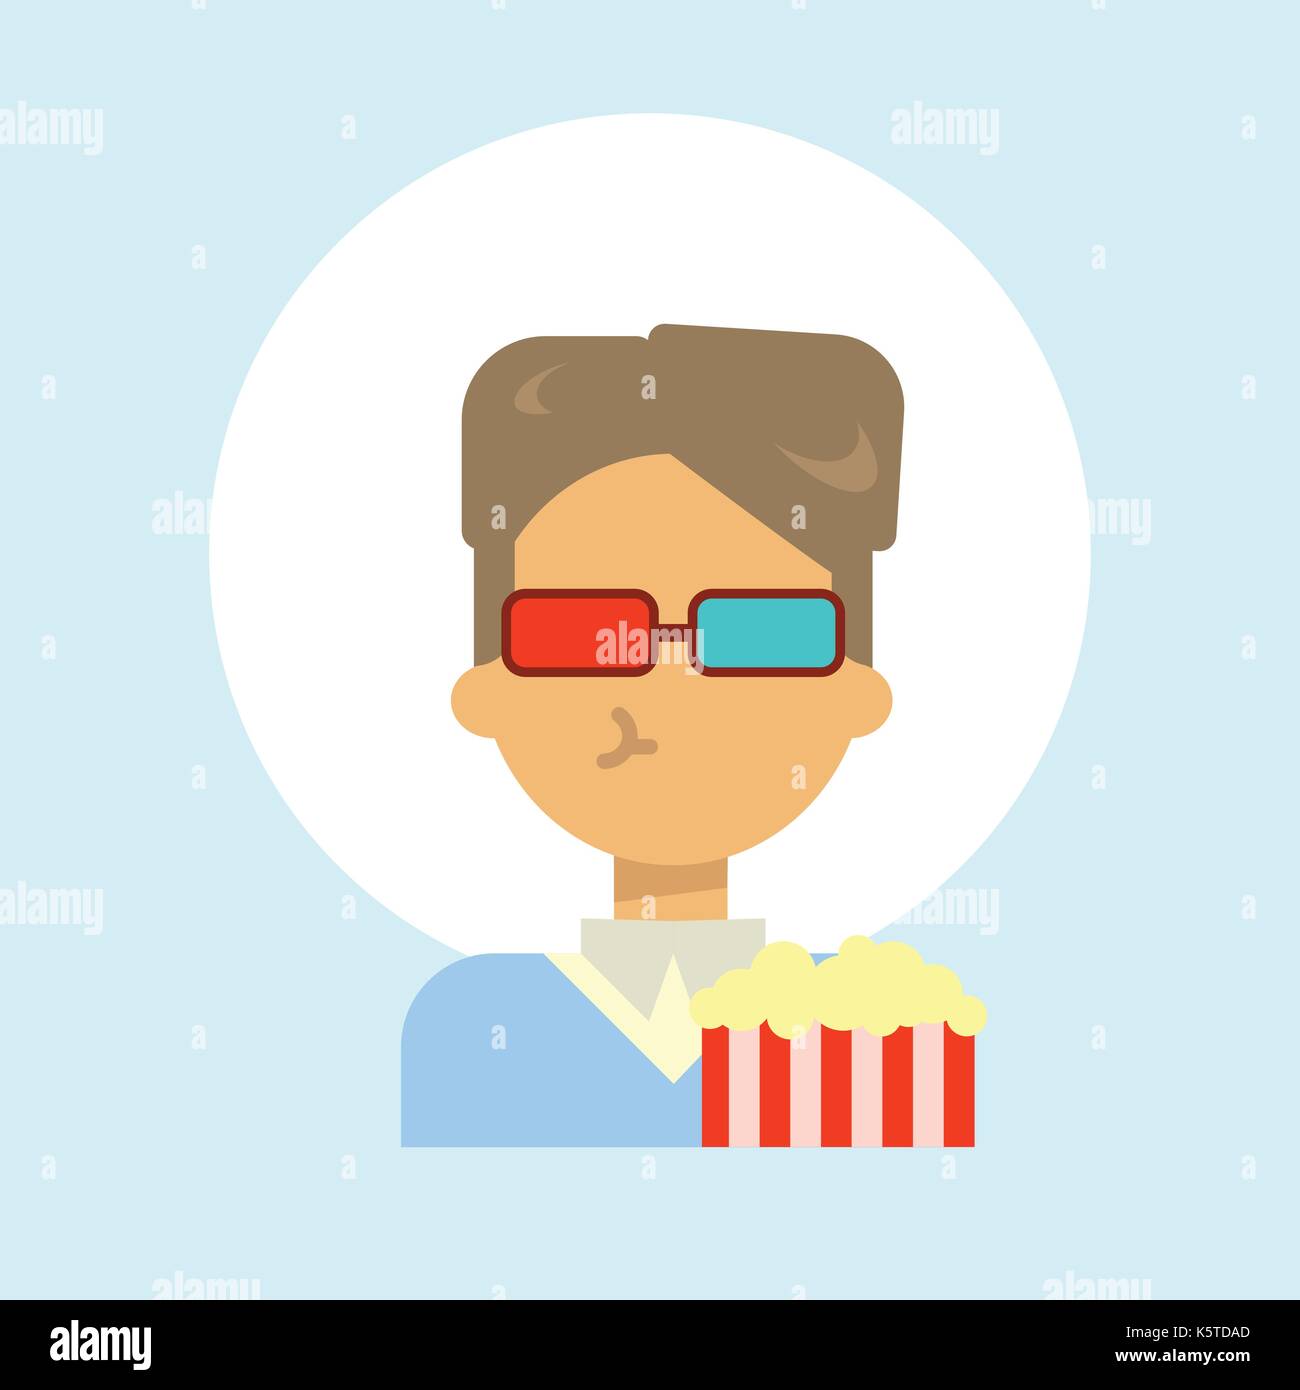 Businessman Icon Image, Male Avatar Profile Vector with Glasses and Beard  Hairstyle Stock Vector - Illustration of avatar, male: 179728610